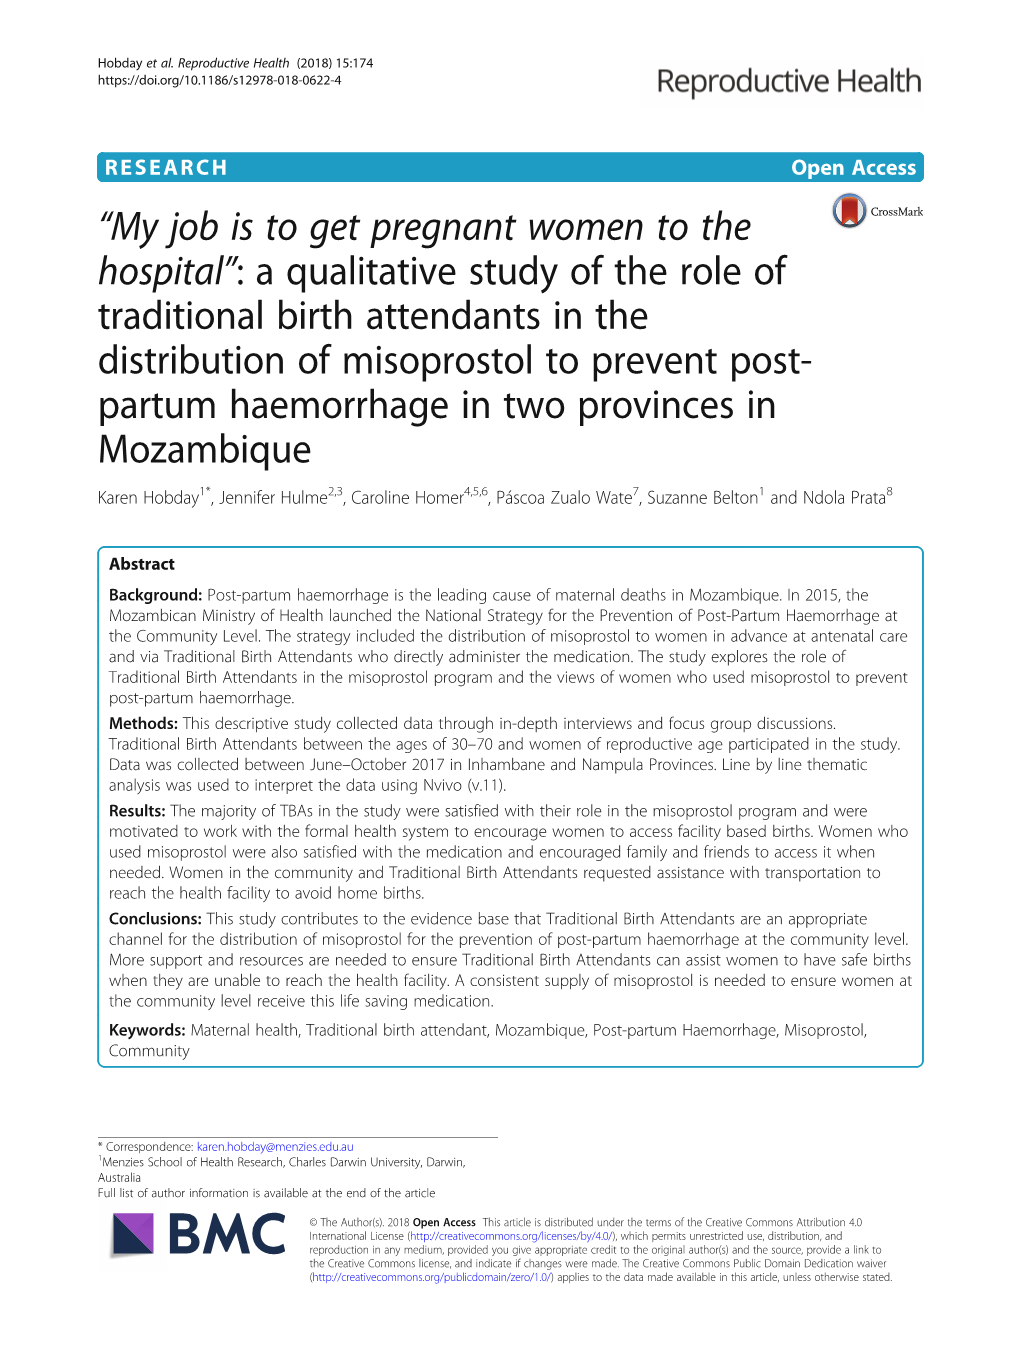 “My Job Is to Get Pregnant Women to the Hospital”: a Qualitative Study Of